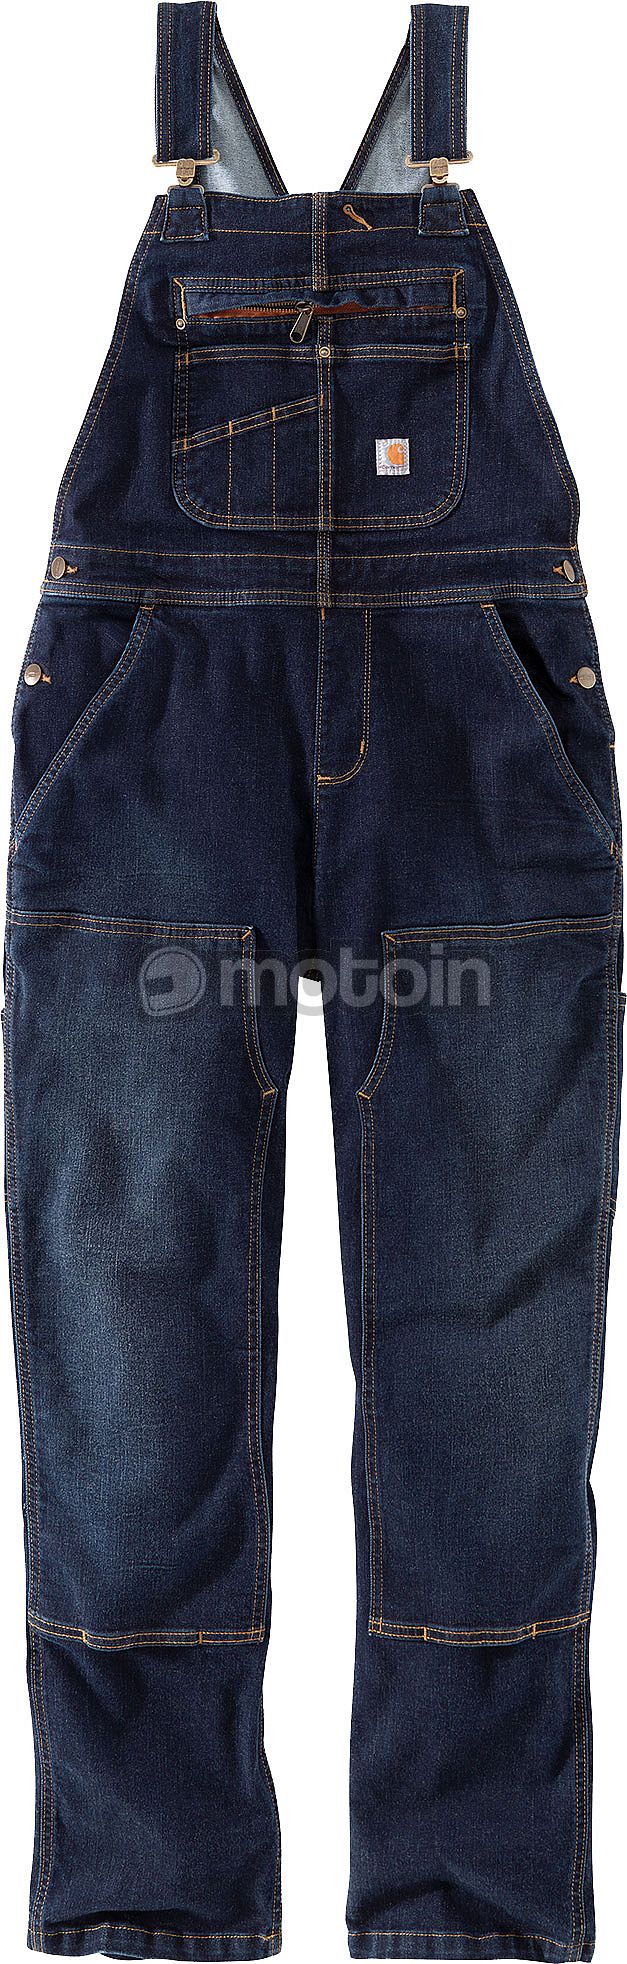 Carhartt Double Front, jeans dungarees